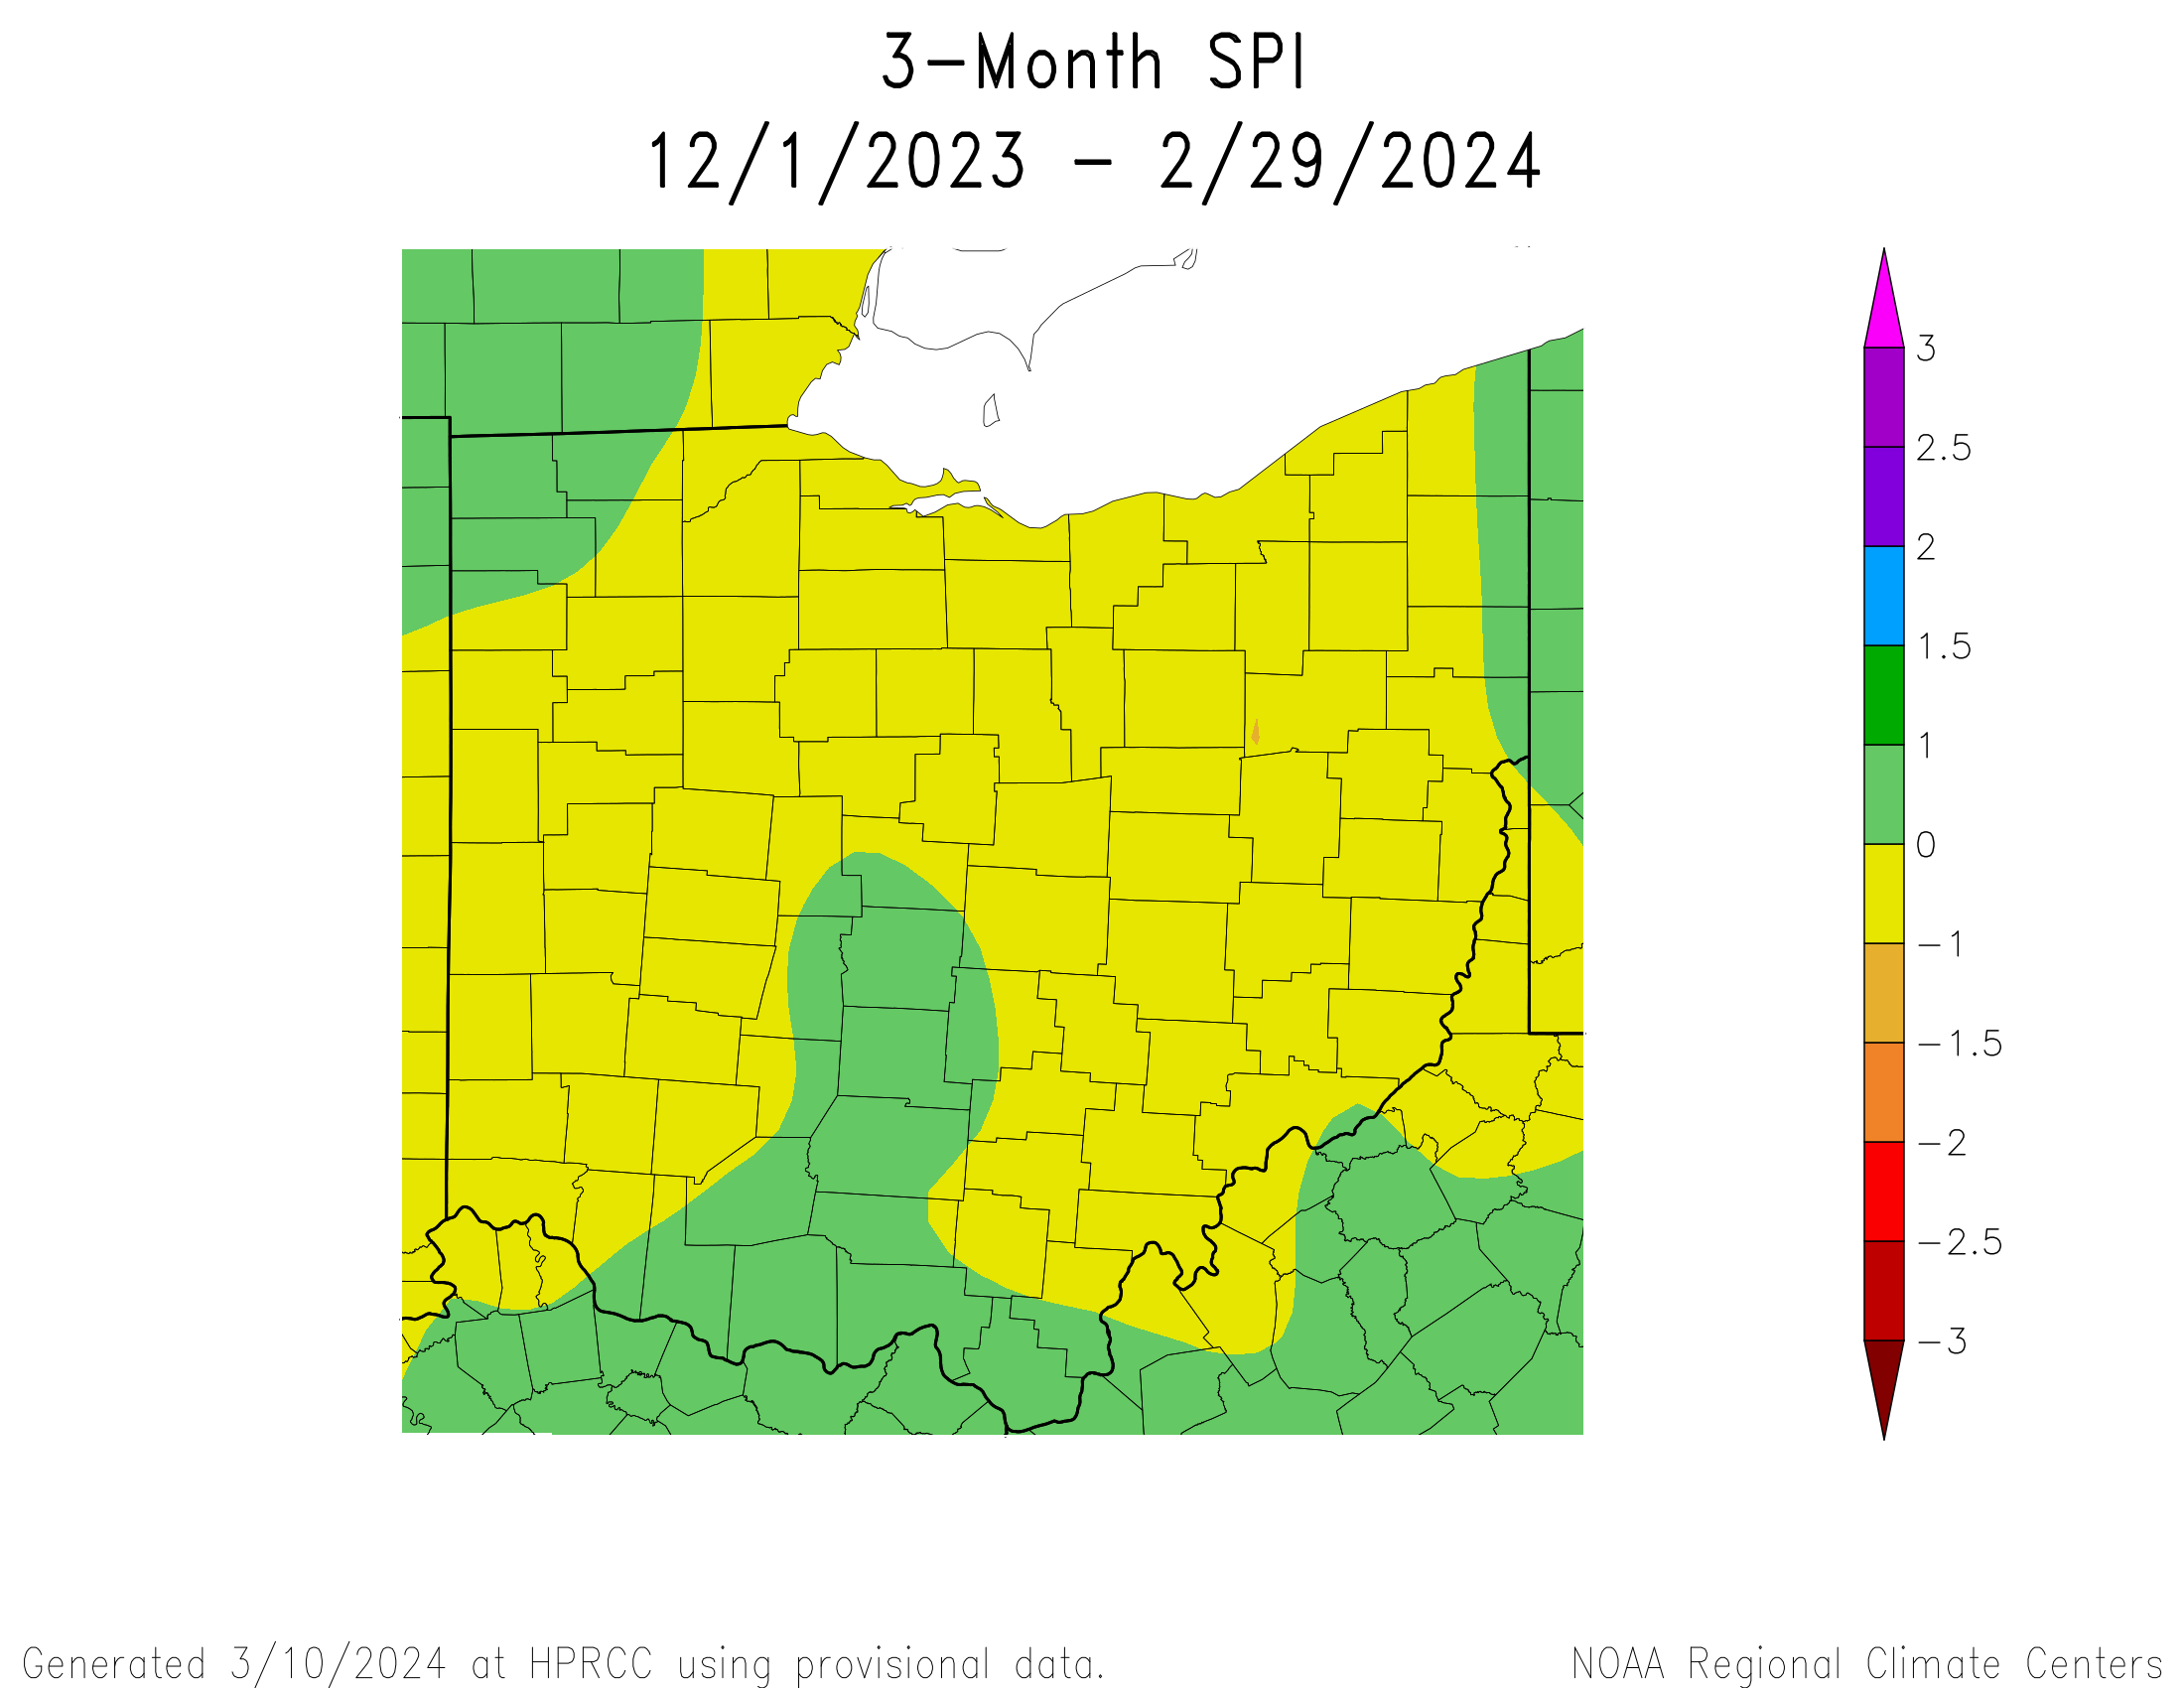 3-Month Soil Precipitation Index for Ohio from December 2023 through February 2024.